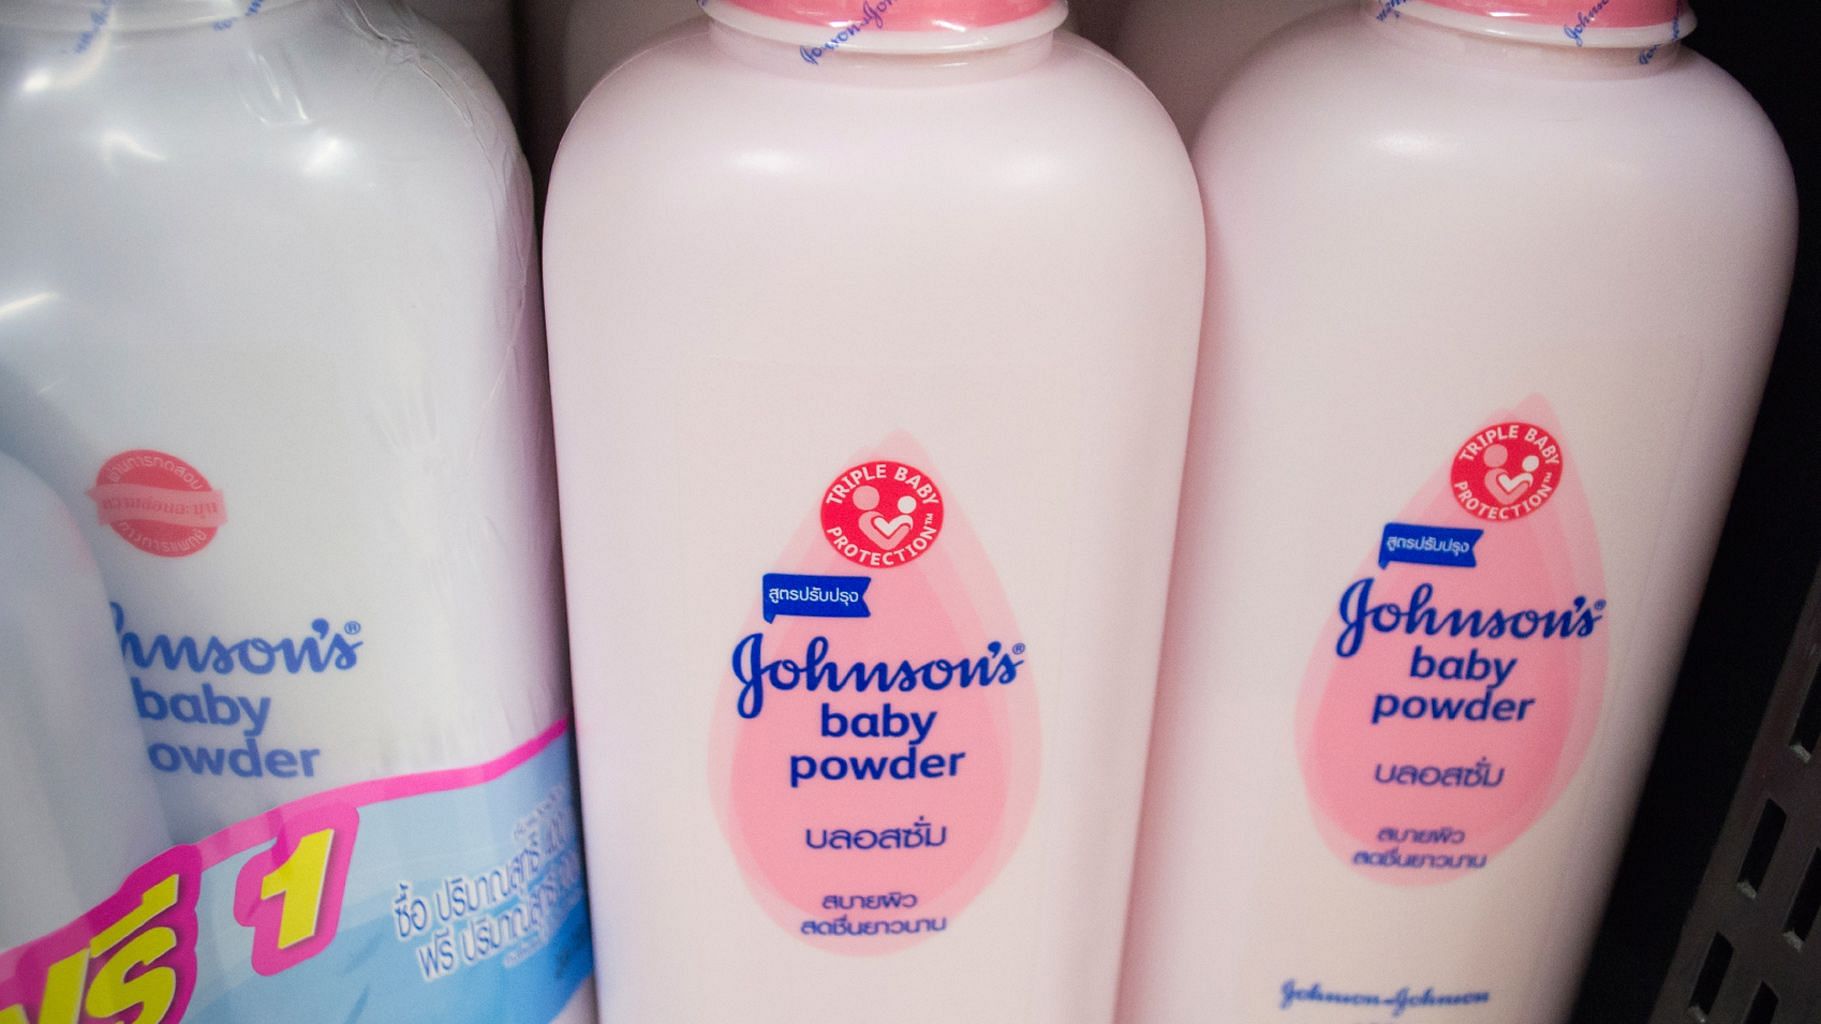 <div class="paragraphs"><p>In a release, the state govt agency said the company's product, Johnson's Baby Powder, may affect the skin of newborn babies.</p></div>